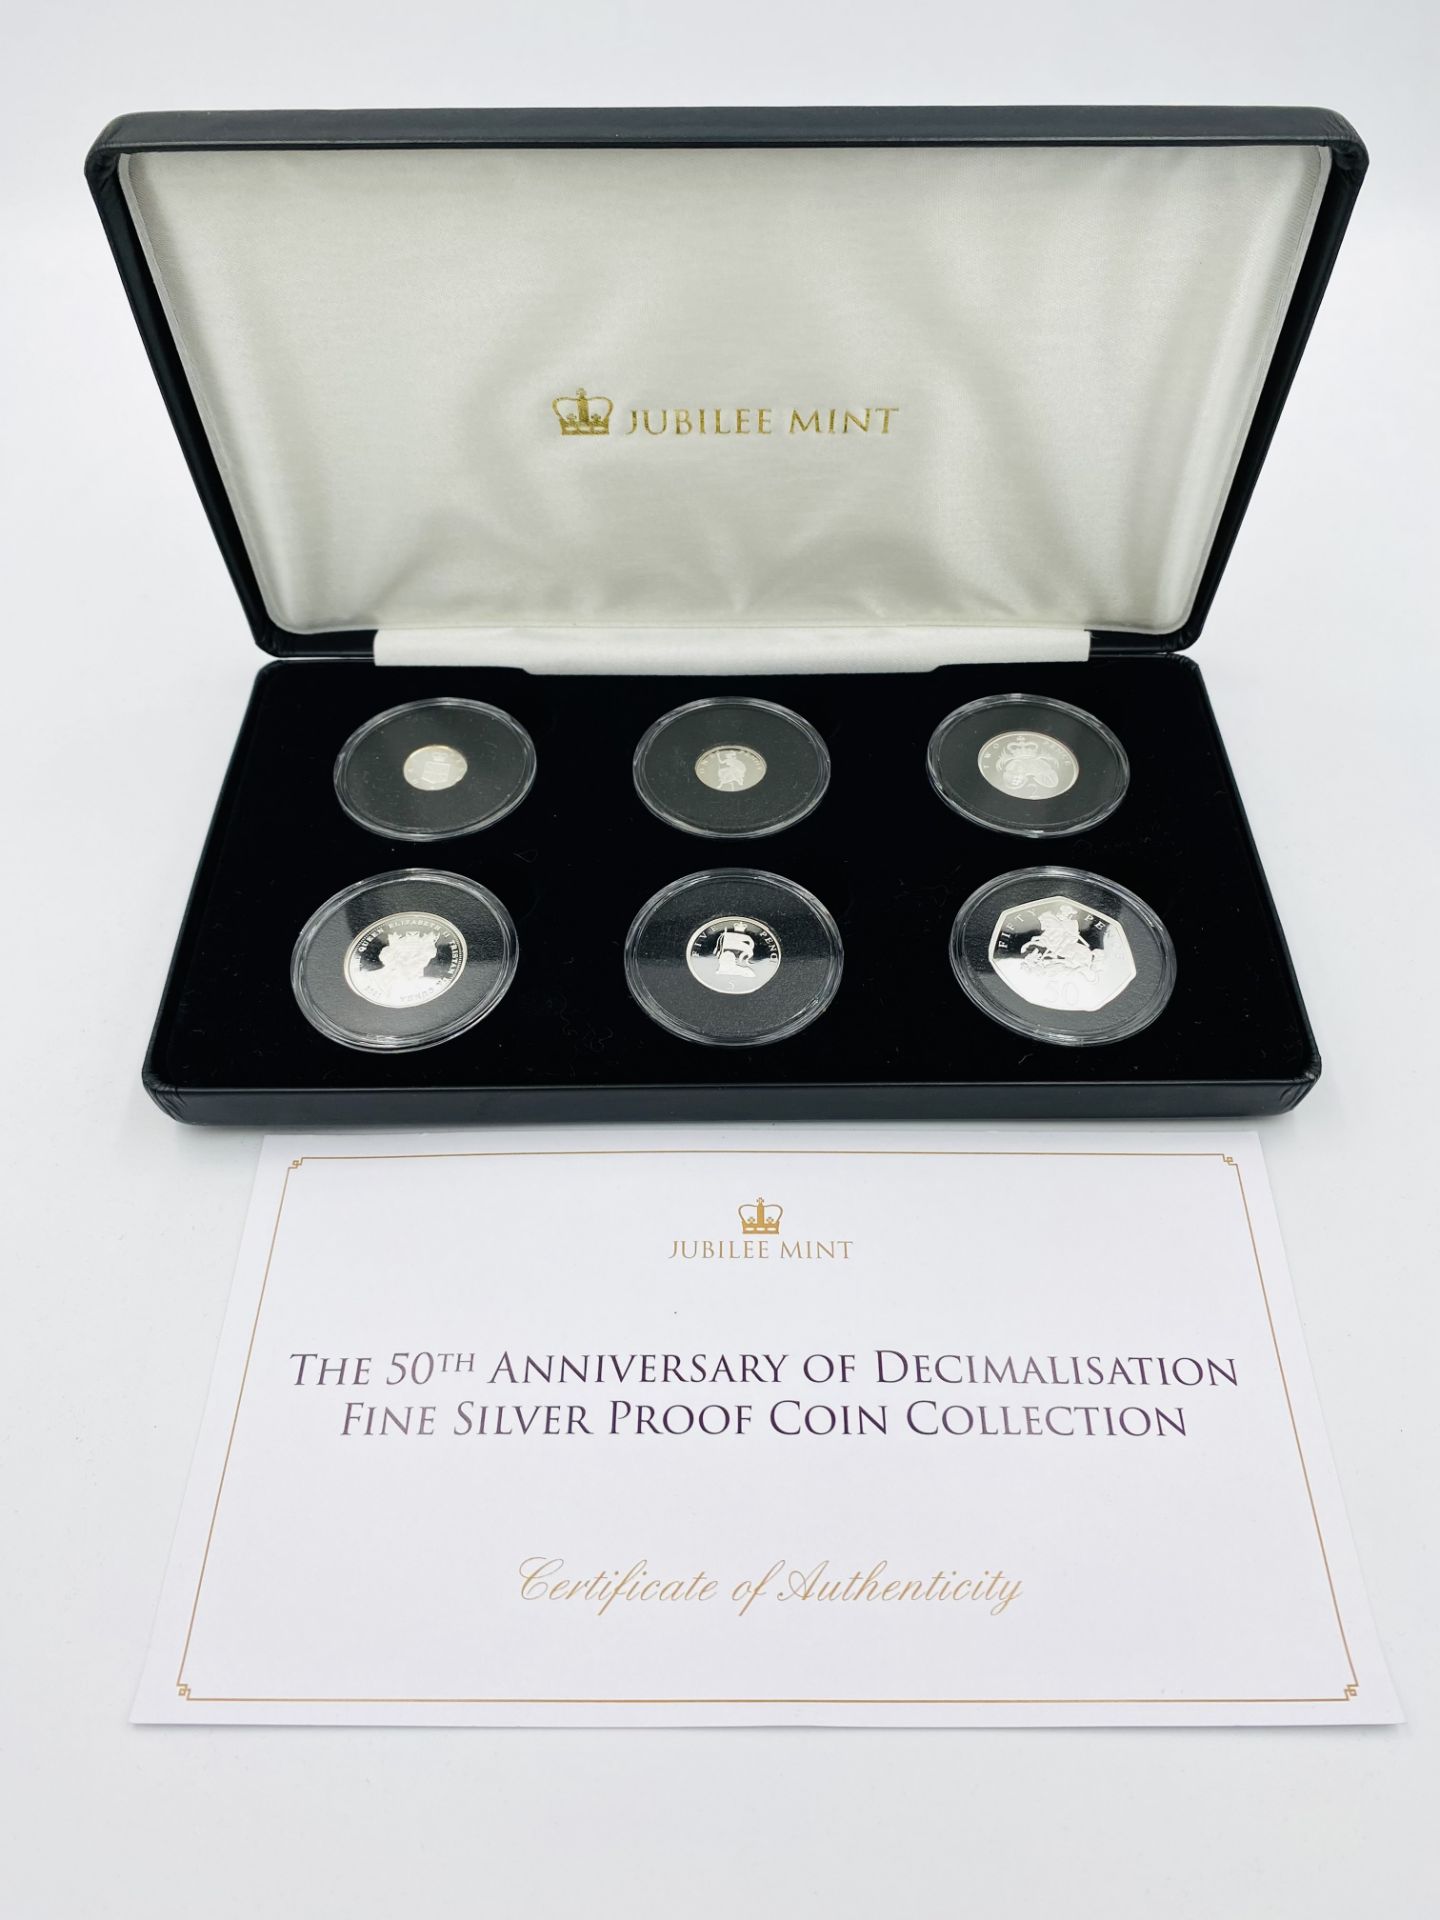 Jubilee Mint 50th Anniversary of Decimalisation fine silver proof coin collection